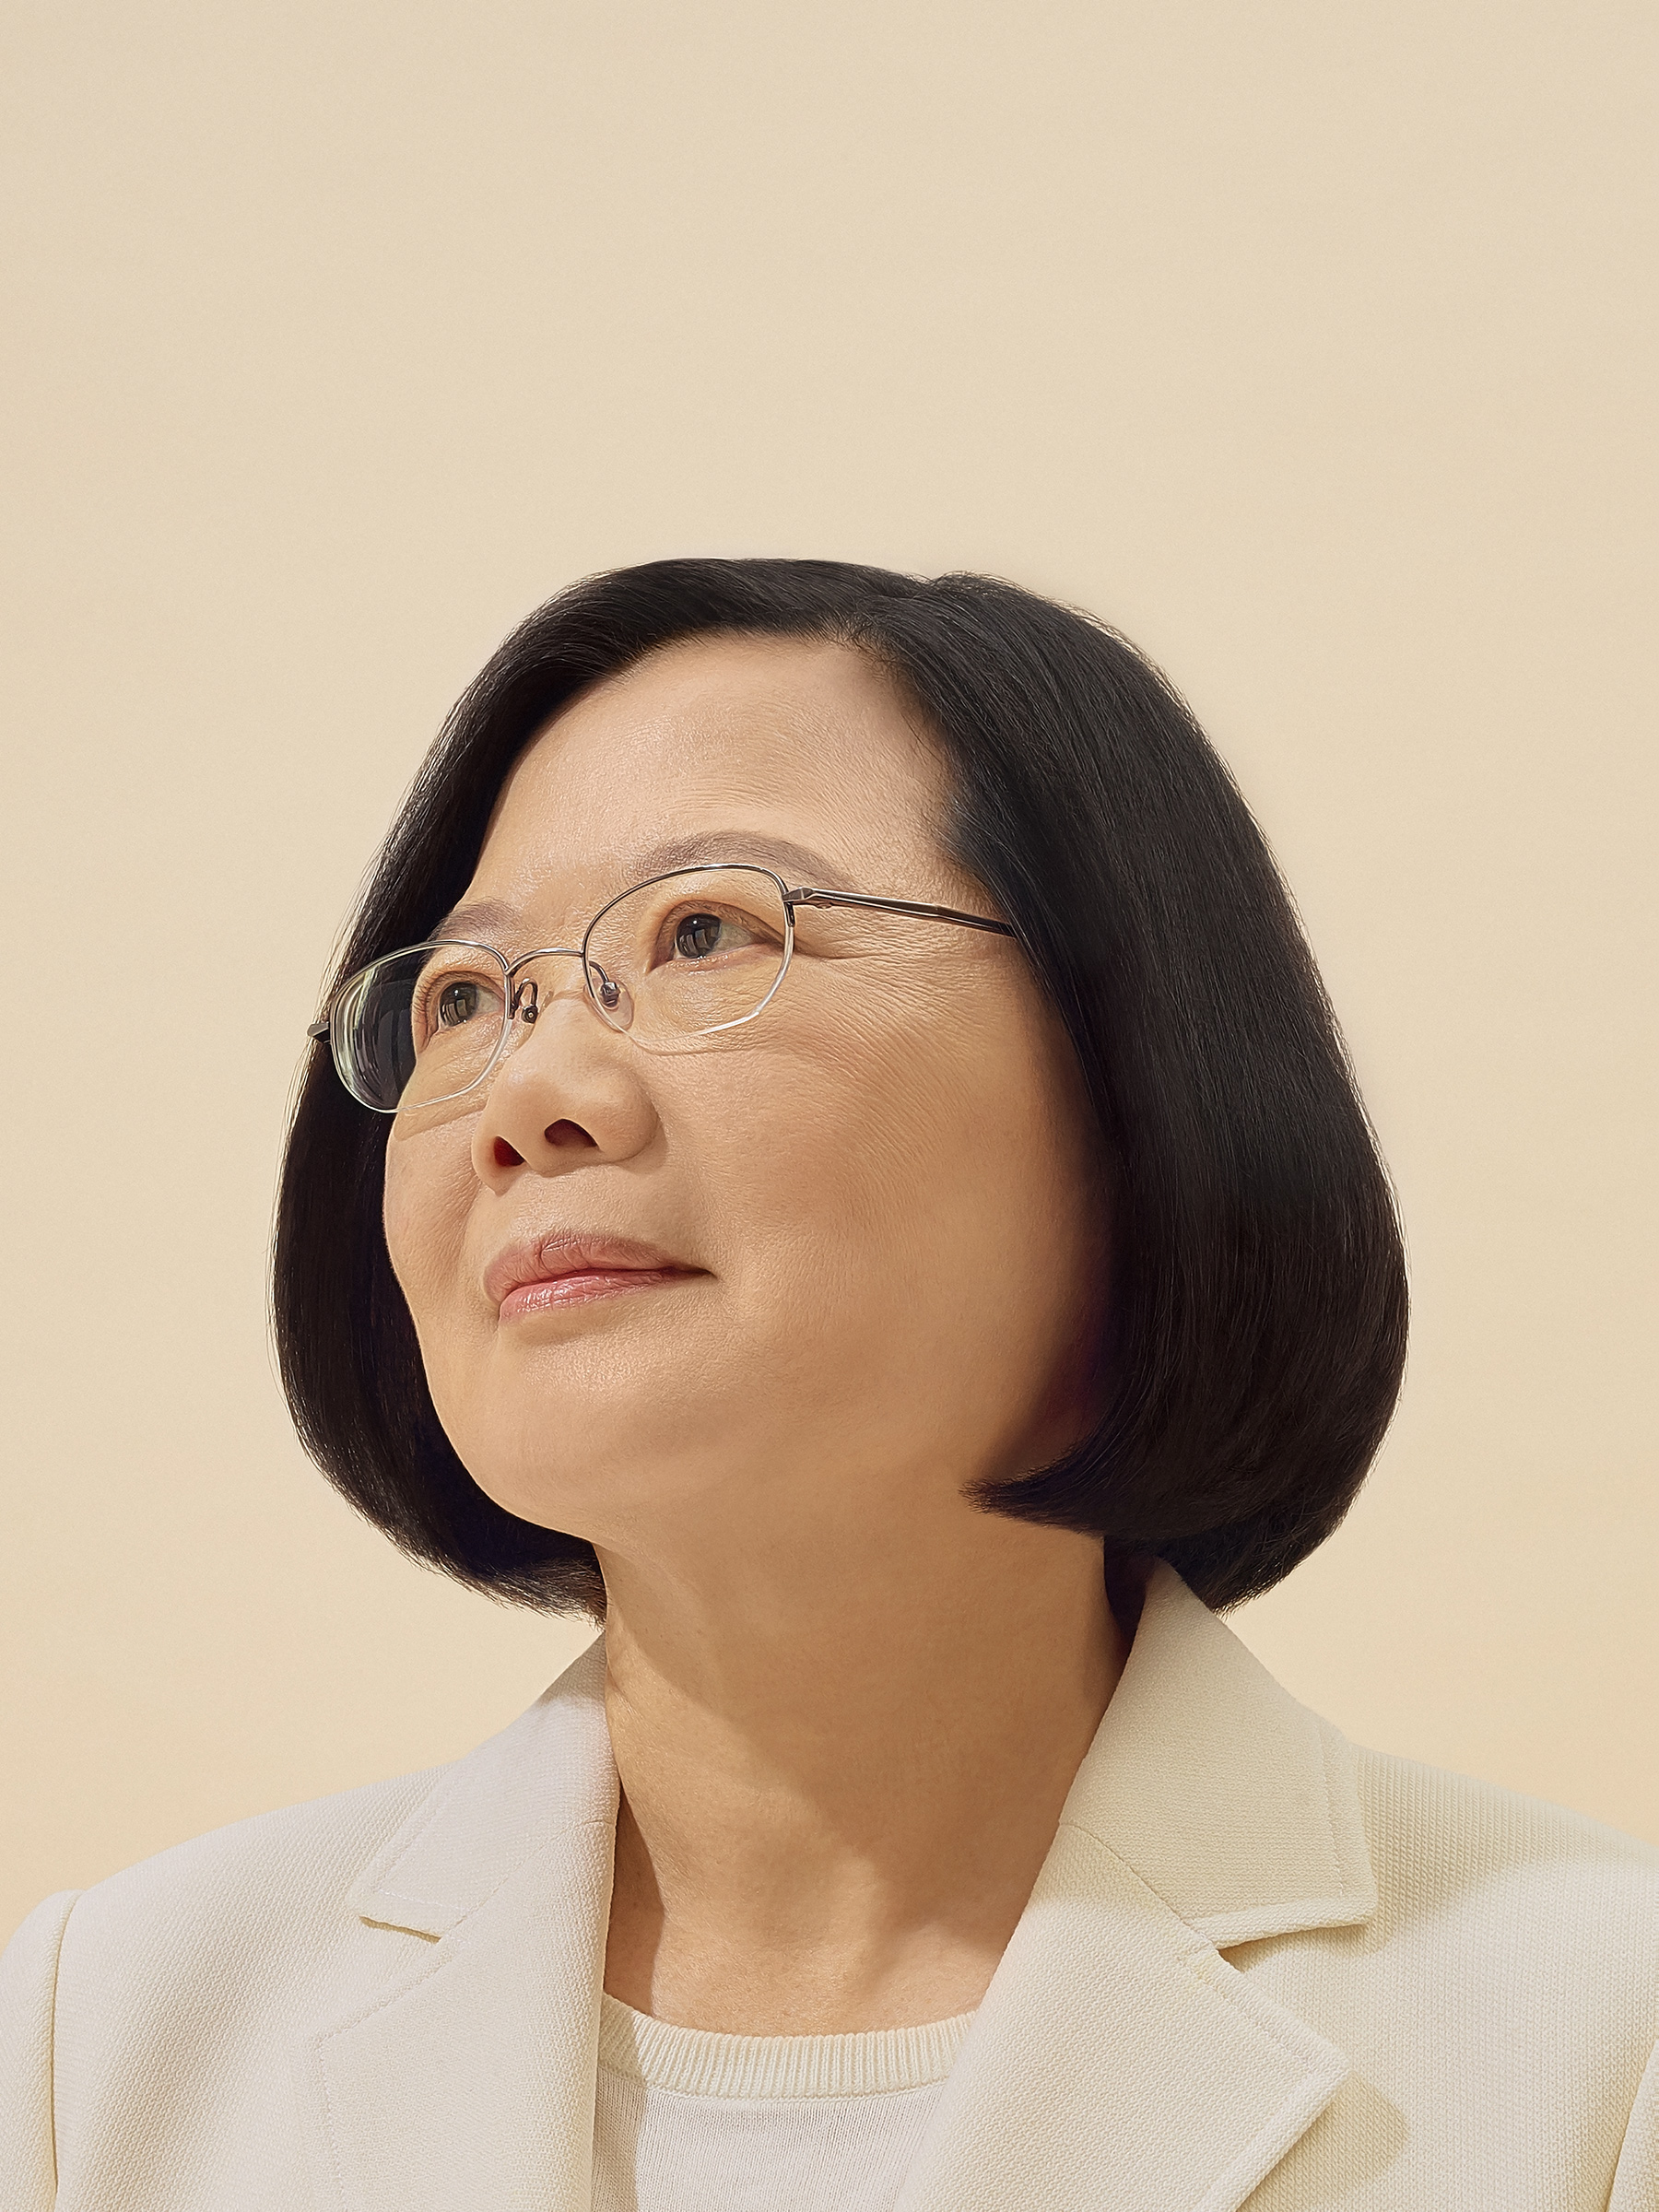 President Tsai, photographed in her Taipei office on Oct. 6. (Nhu Xuan Hua for TIME)